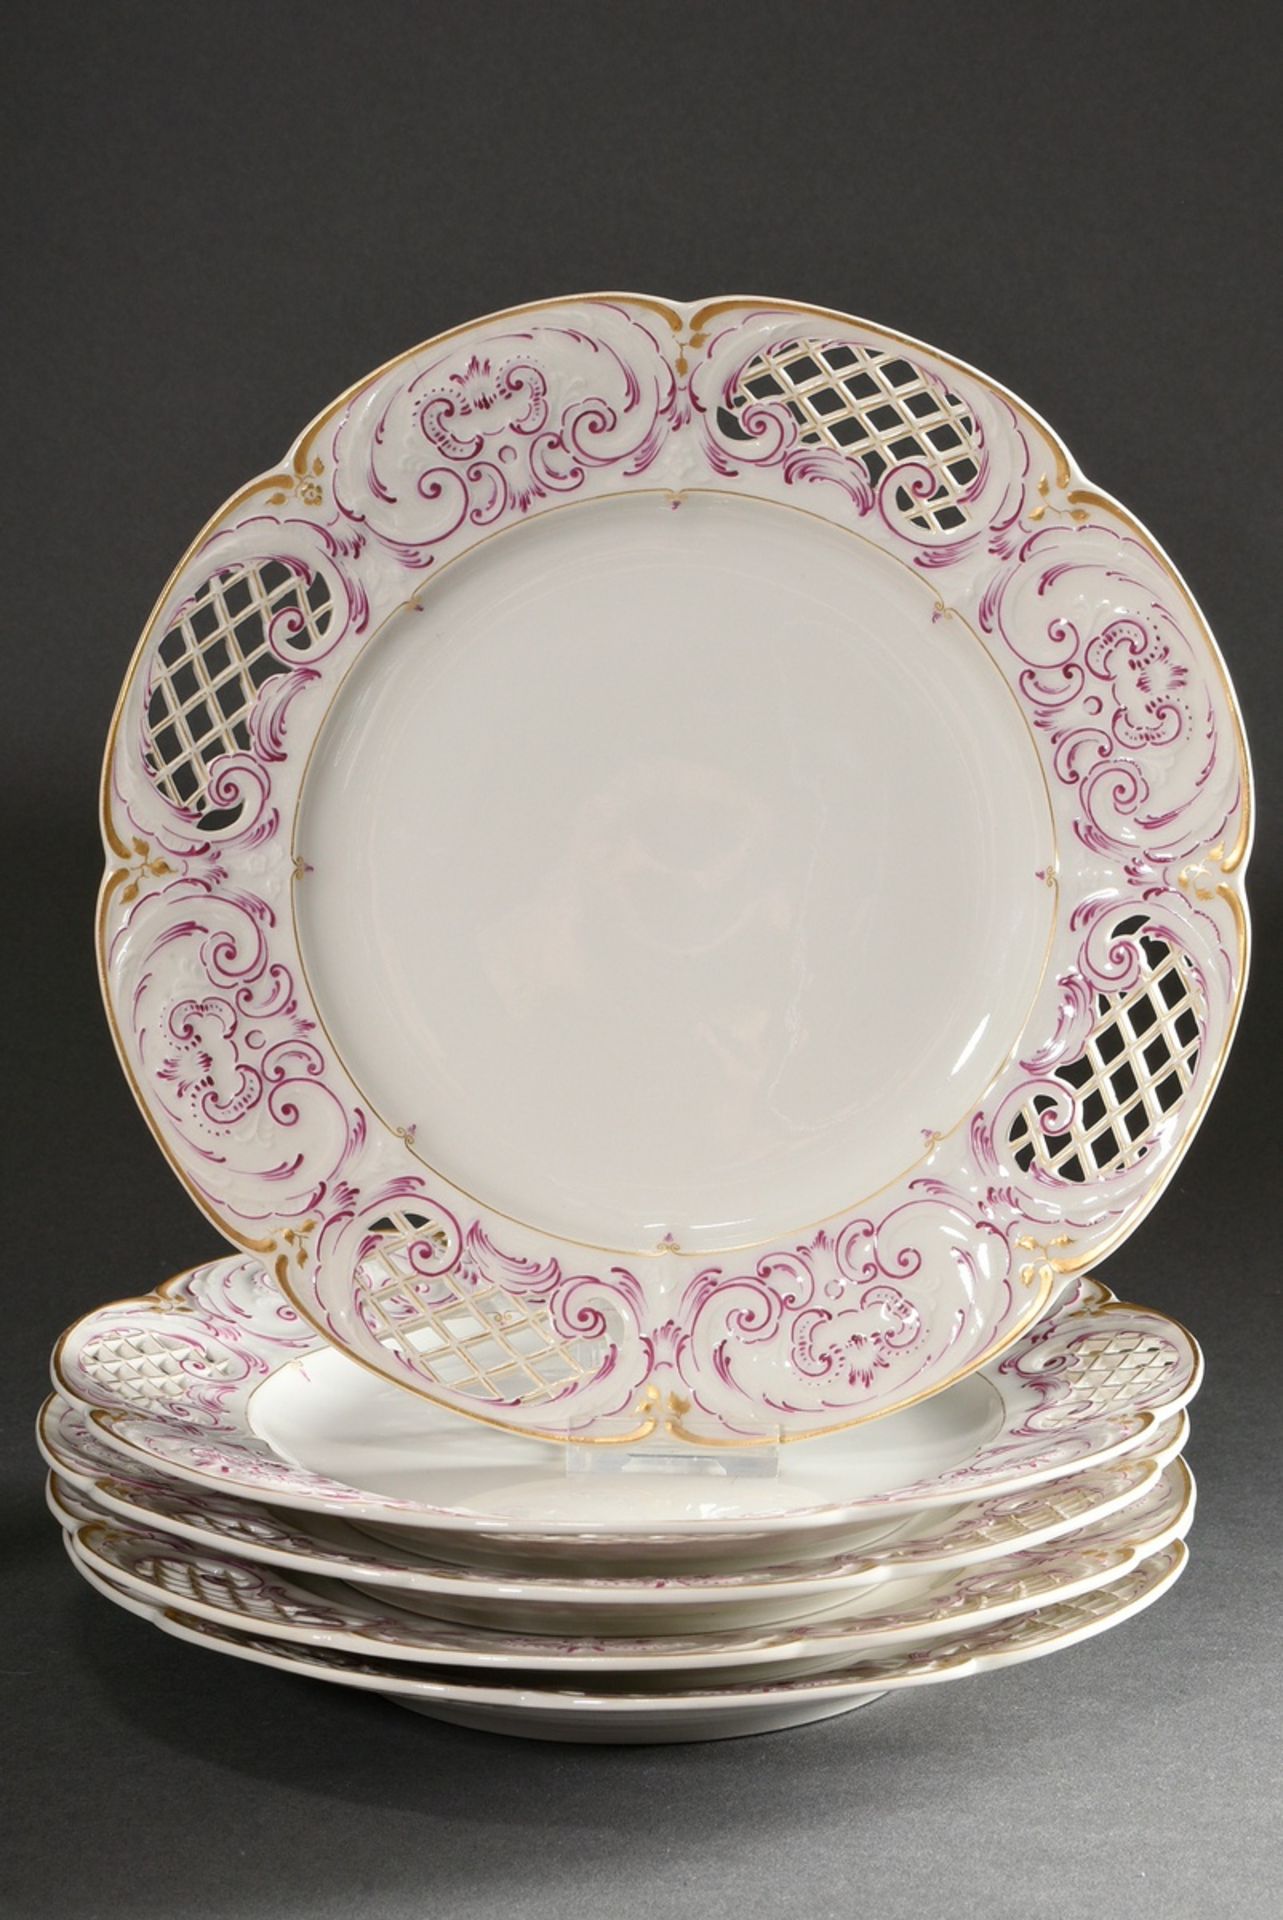 69 Pieces KPM dinner service in Rococo form with purple and gold staffage, red imperial orb mark, c - Image 21 of 22